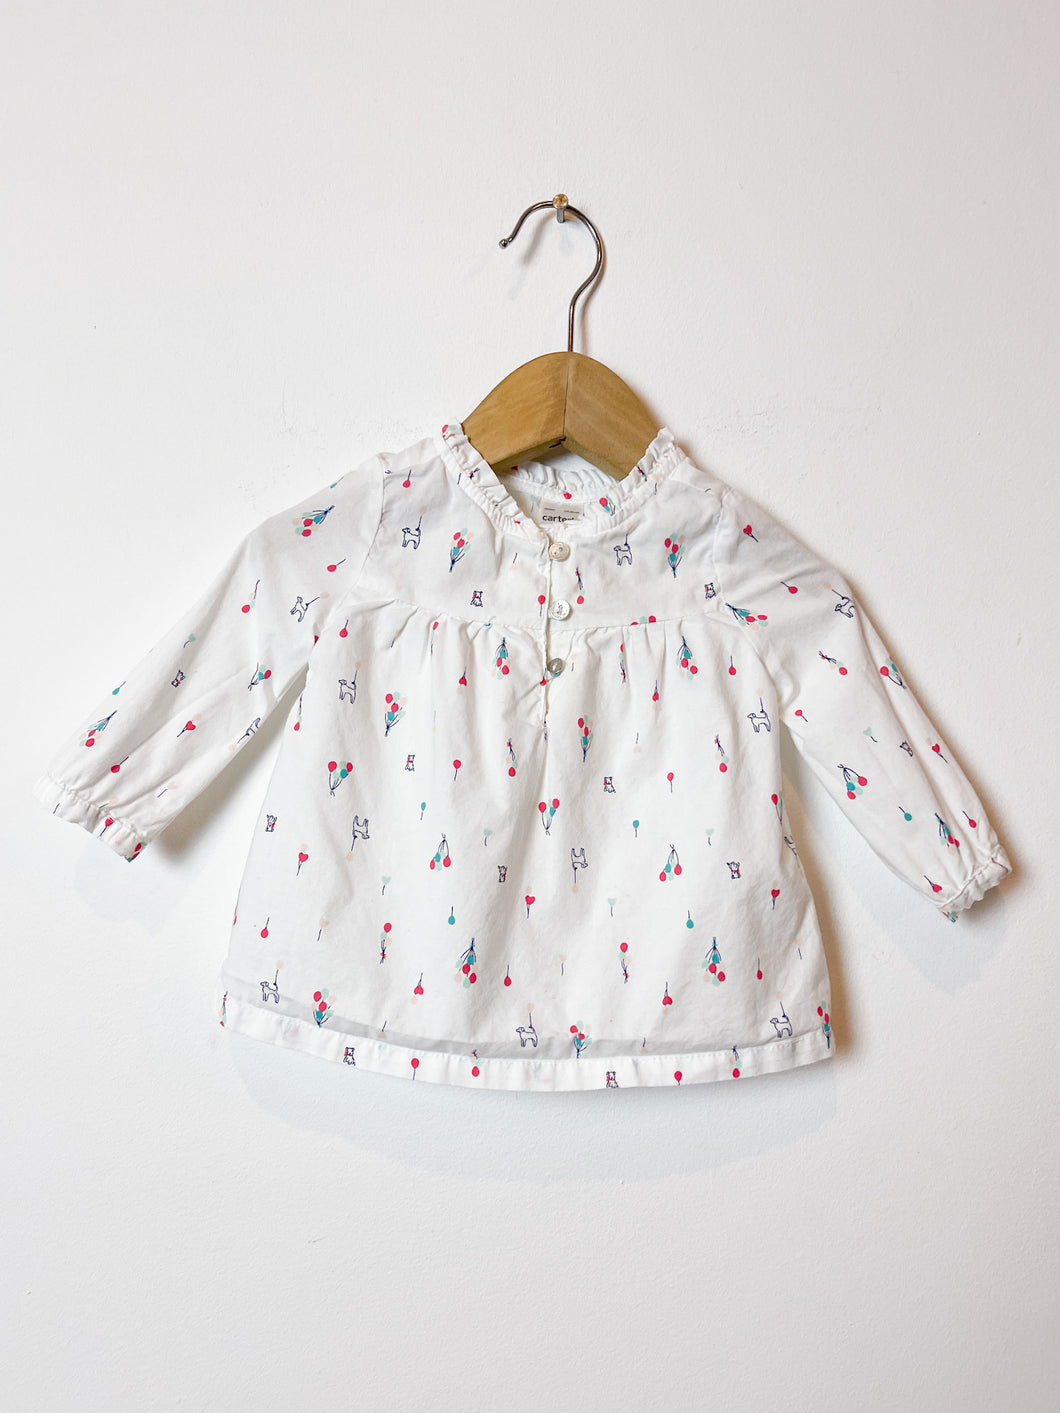 Girls White Carters Shirt Size 9 Months